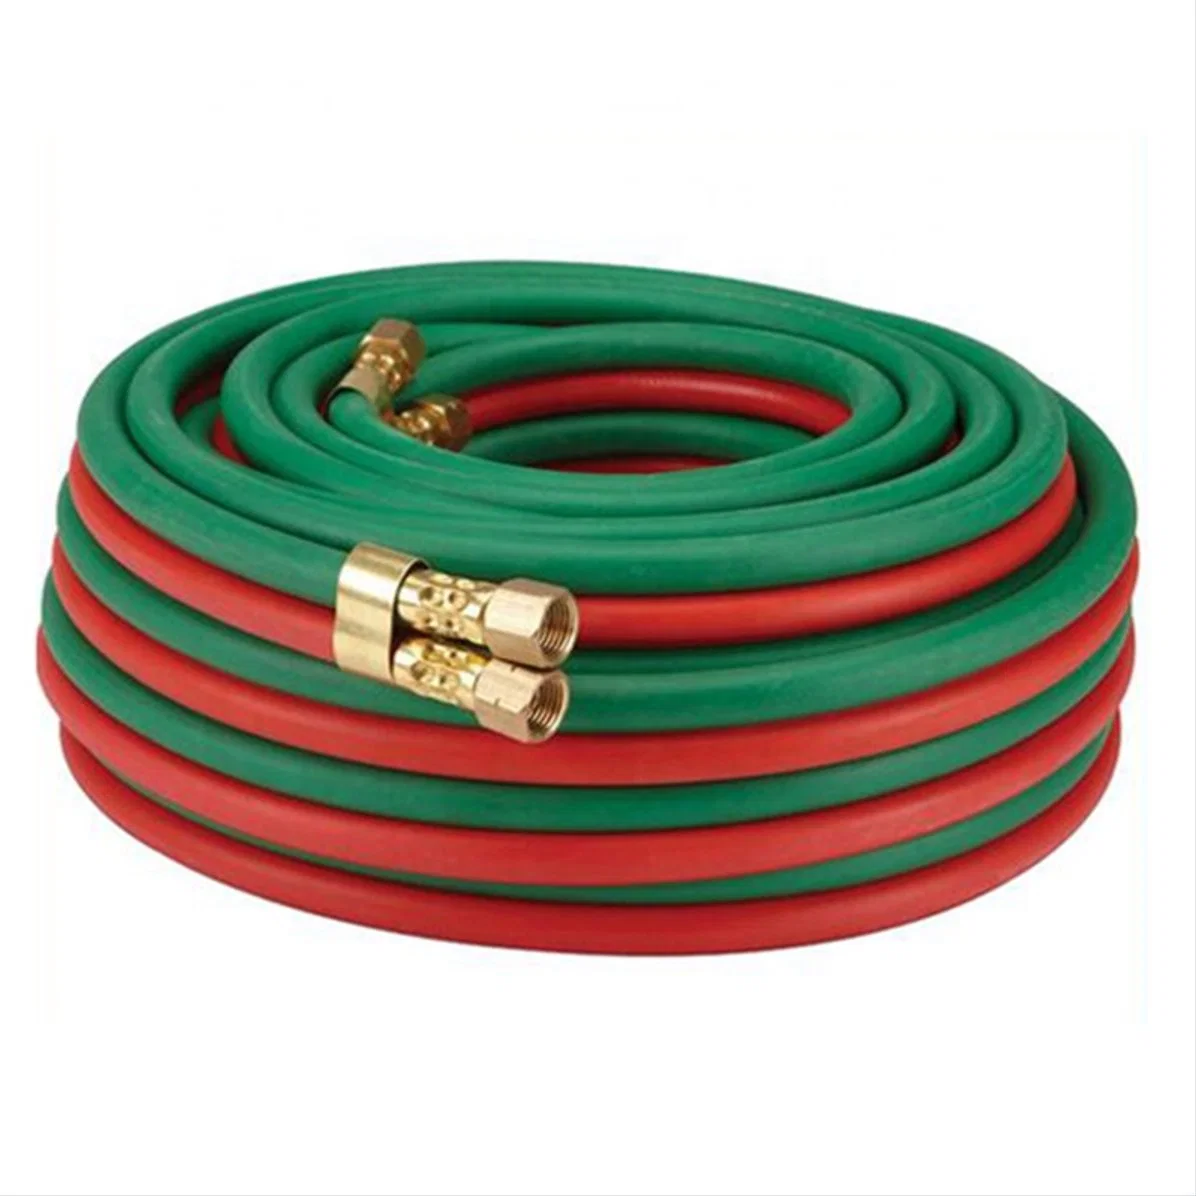 PVC Industrial Twin Welding Hose for Transport Oxygen and Acetylene